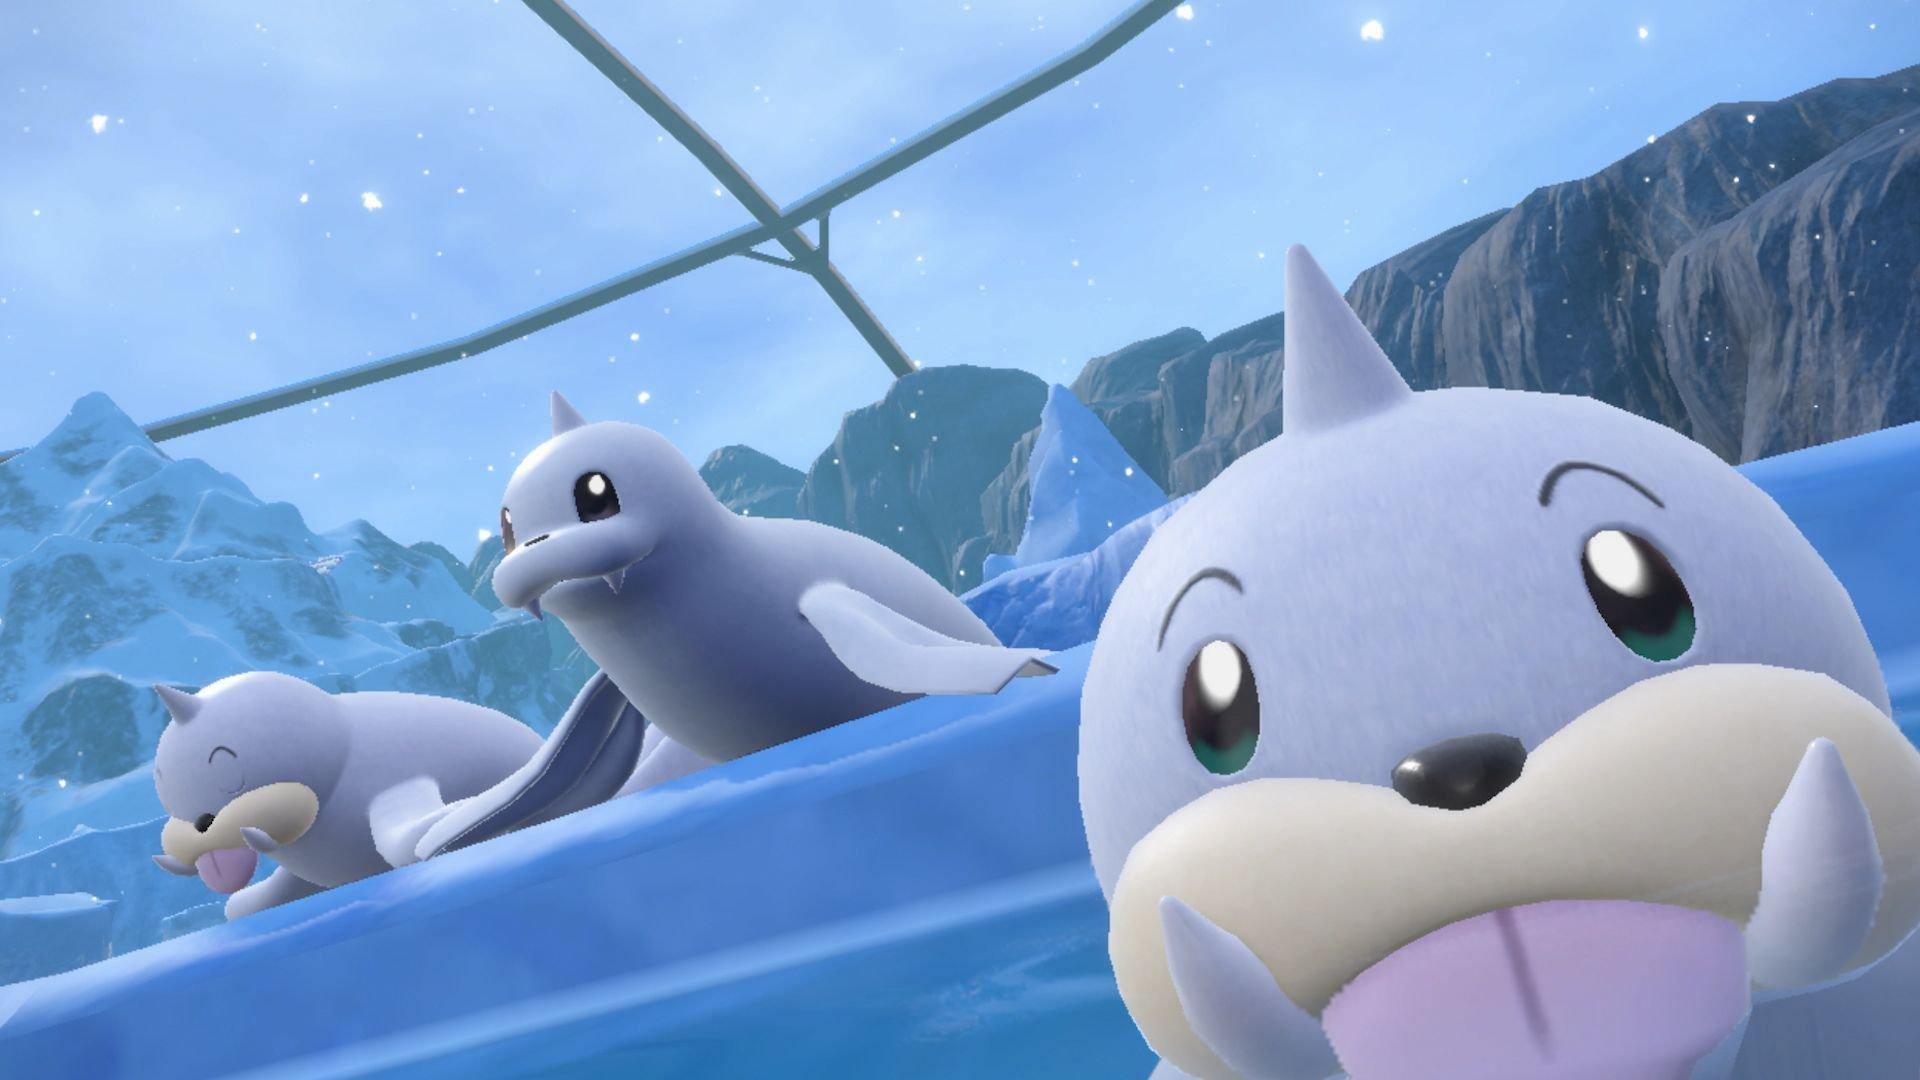 We May Know What Pokémon Will Return In Scarlet And Violet's DLC